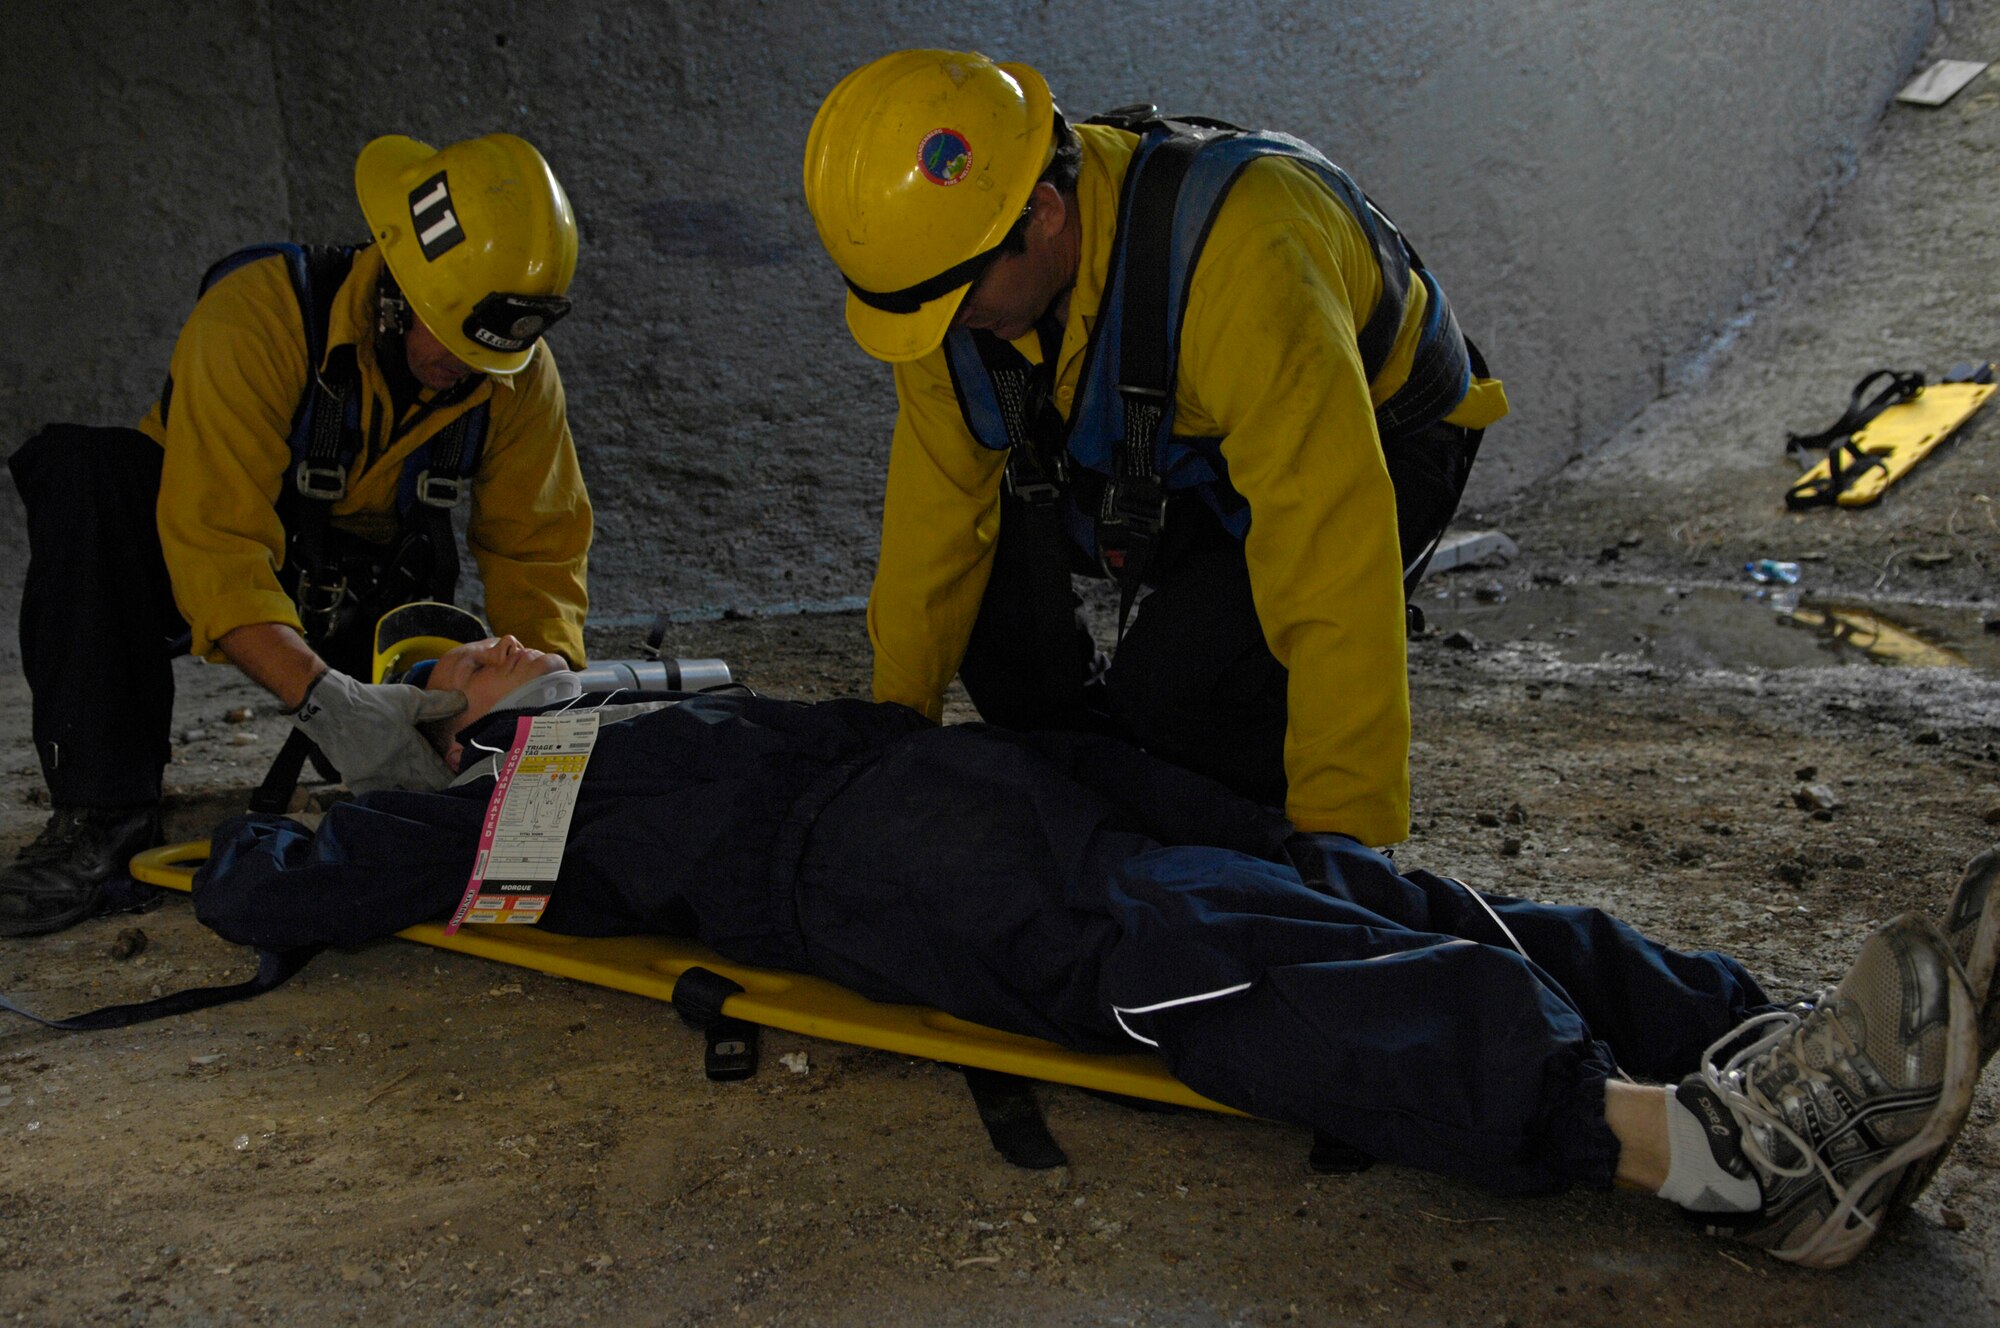 VANDENBERG AIR FORCE BASE, Calif. -- Firefighters George Georgas, from the Santa Barbara County Department and Mathew Stevens, a Vandenberg fire fighter, quickly prepares an injured survivor for evacuation during a building collapse exercise here Monday, Nov. 30, 2009. (U.S. Air Force photo/Airman 1st Class Andrew Lee) 

 

 